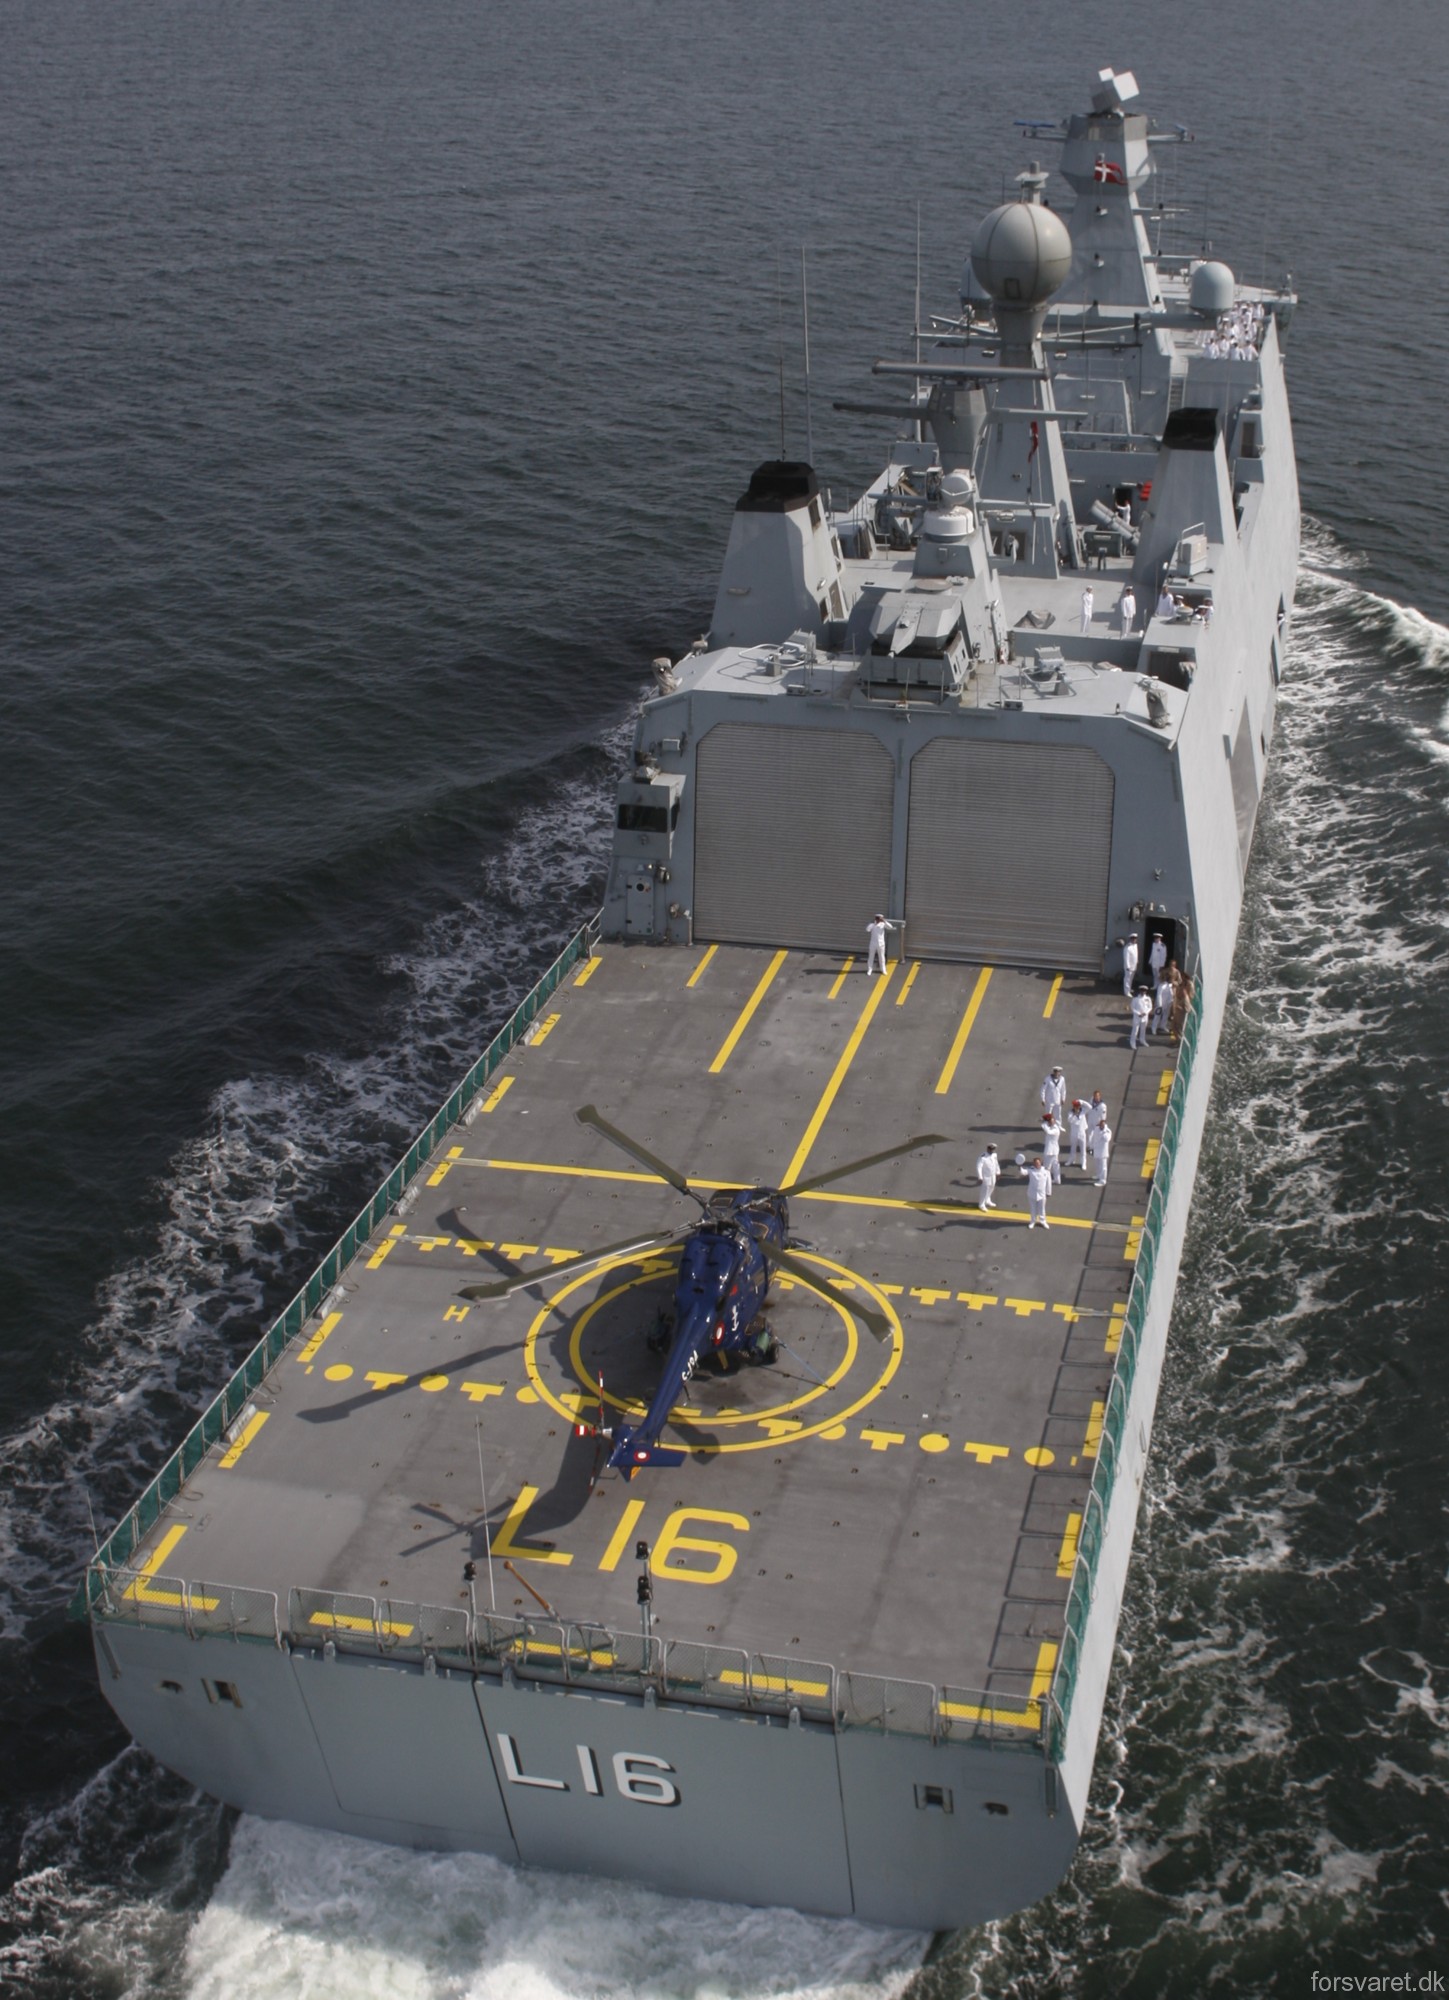 l-16 hdms absalon command support ship frigate royal danish navy 17 flight deck westland lynx helicopter